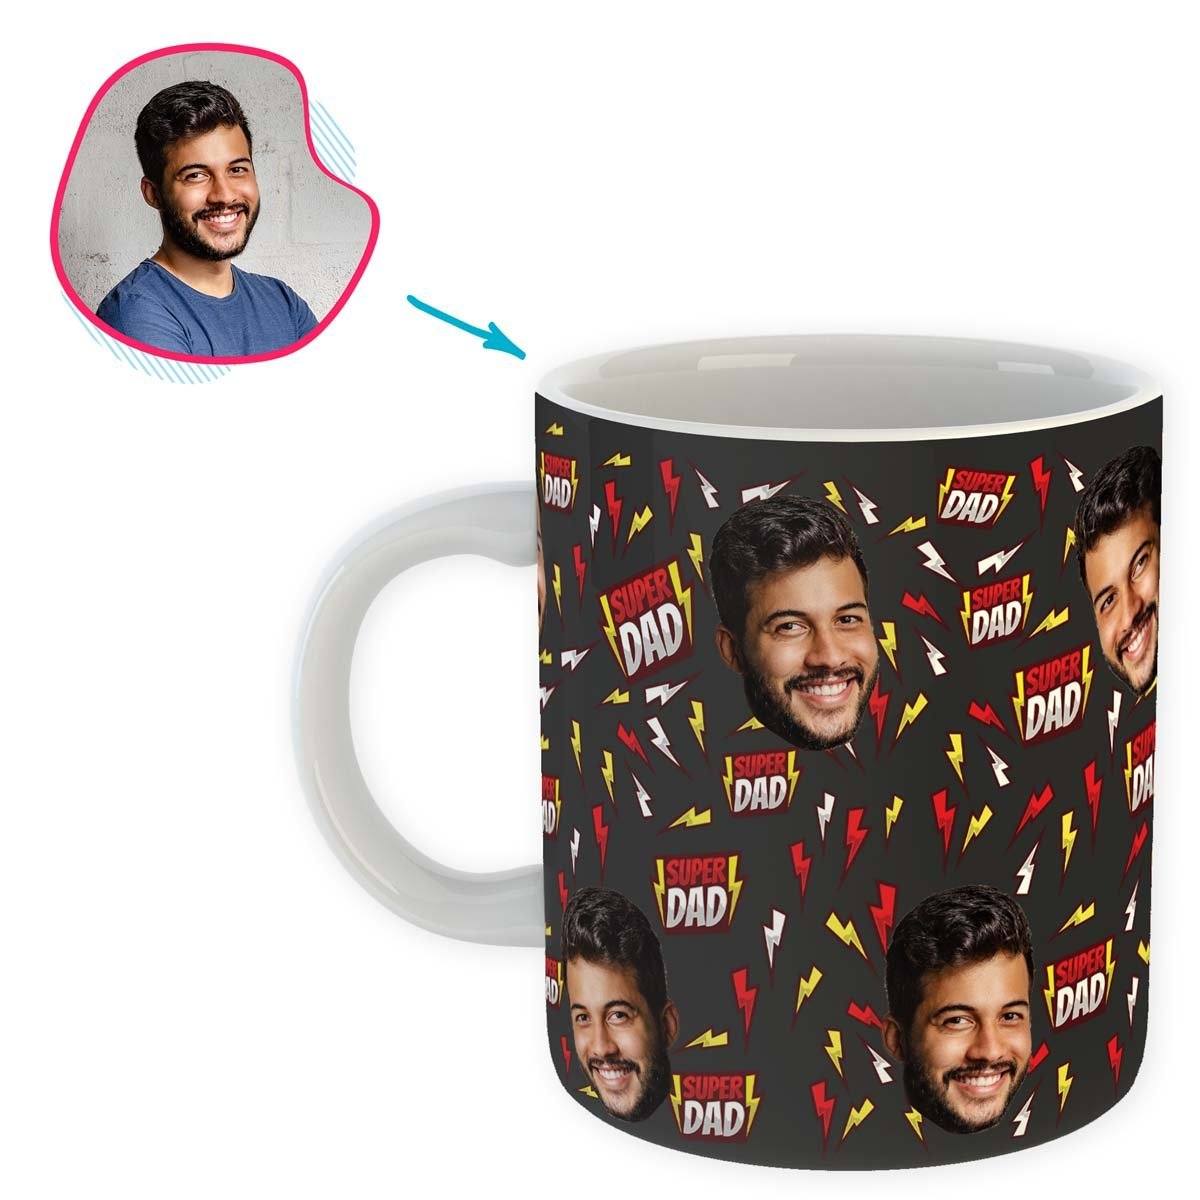 dark Super Dad mug personalized with photo of face printed on it